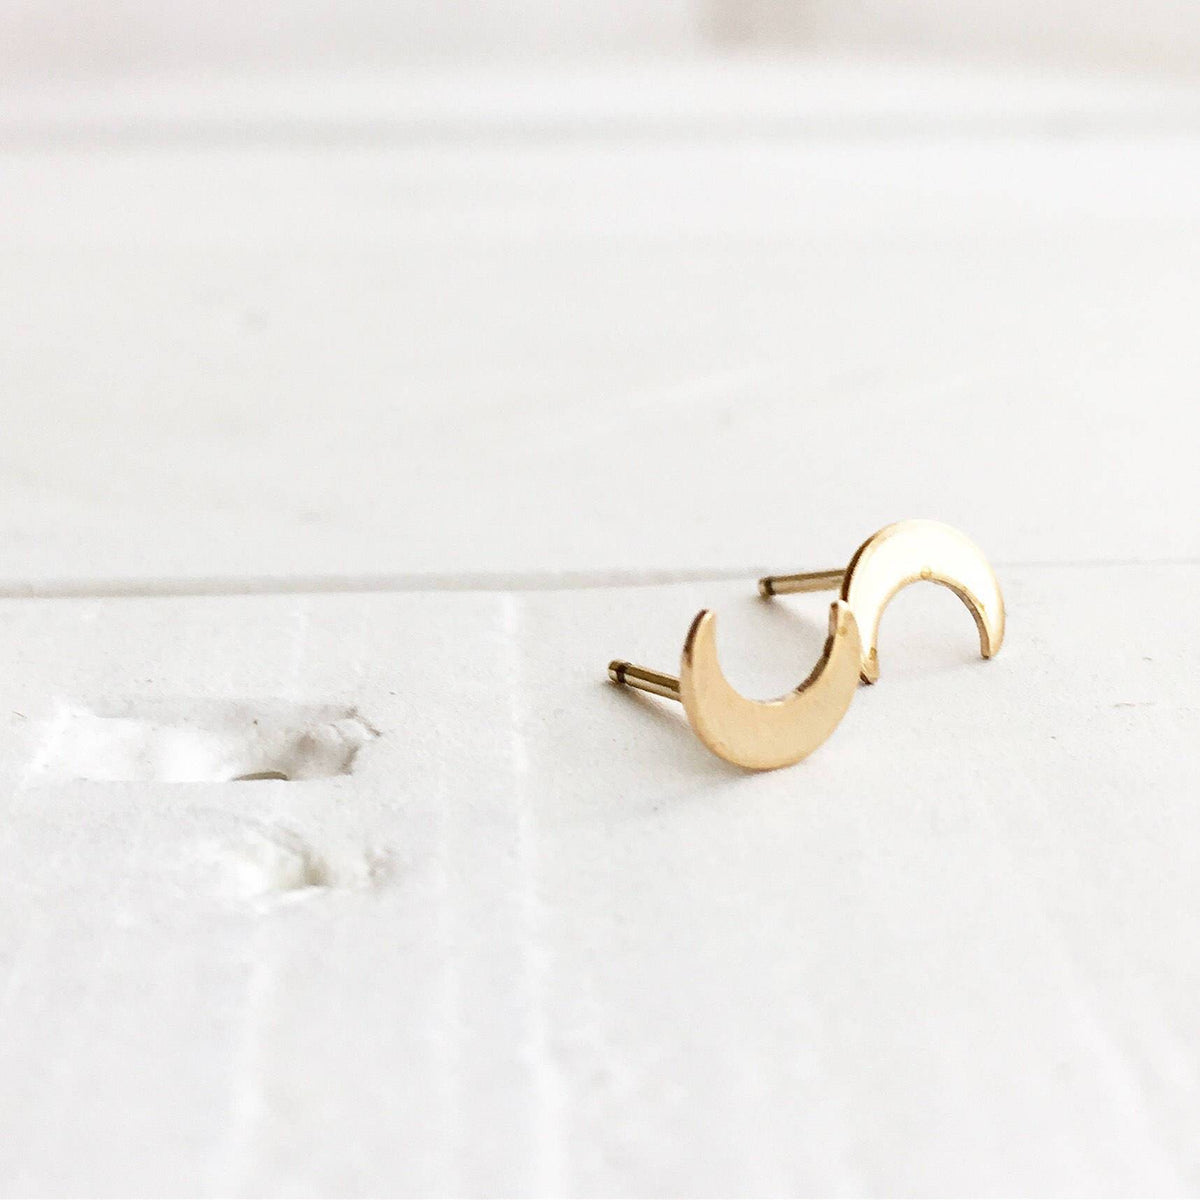 Tiny Crescent Moon Stud Earrings Dainty Studs 14k Gold Filled